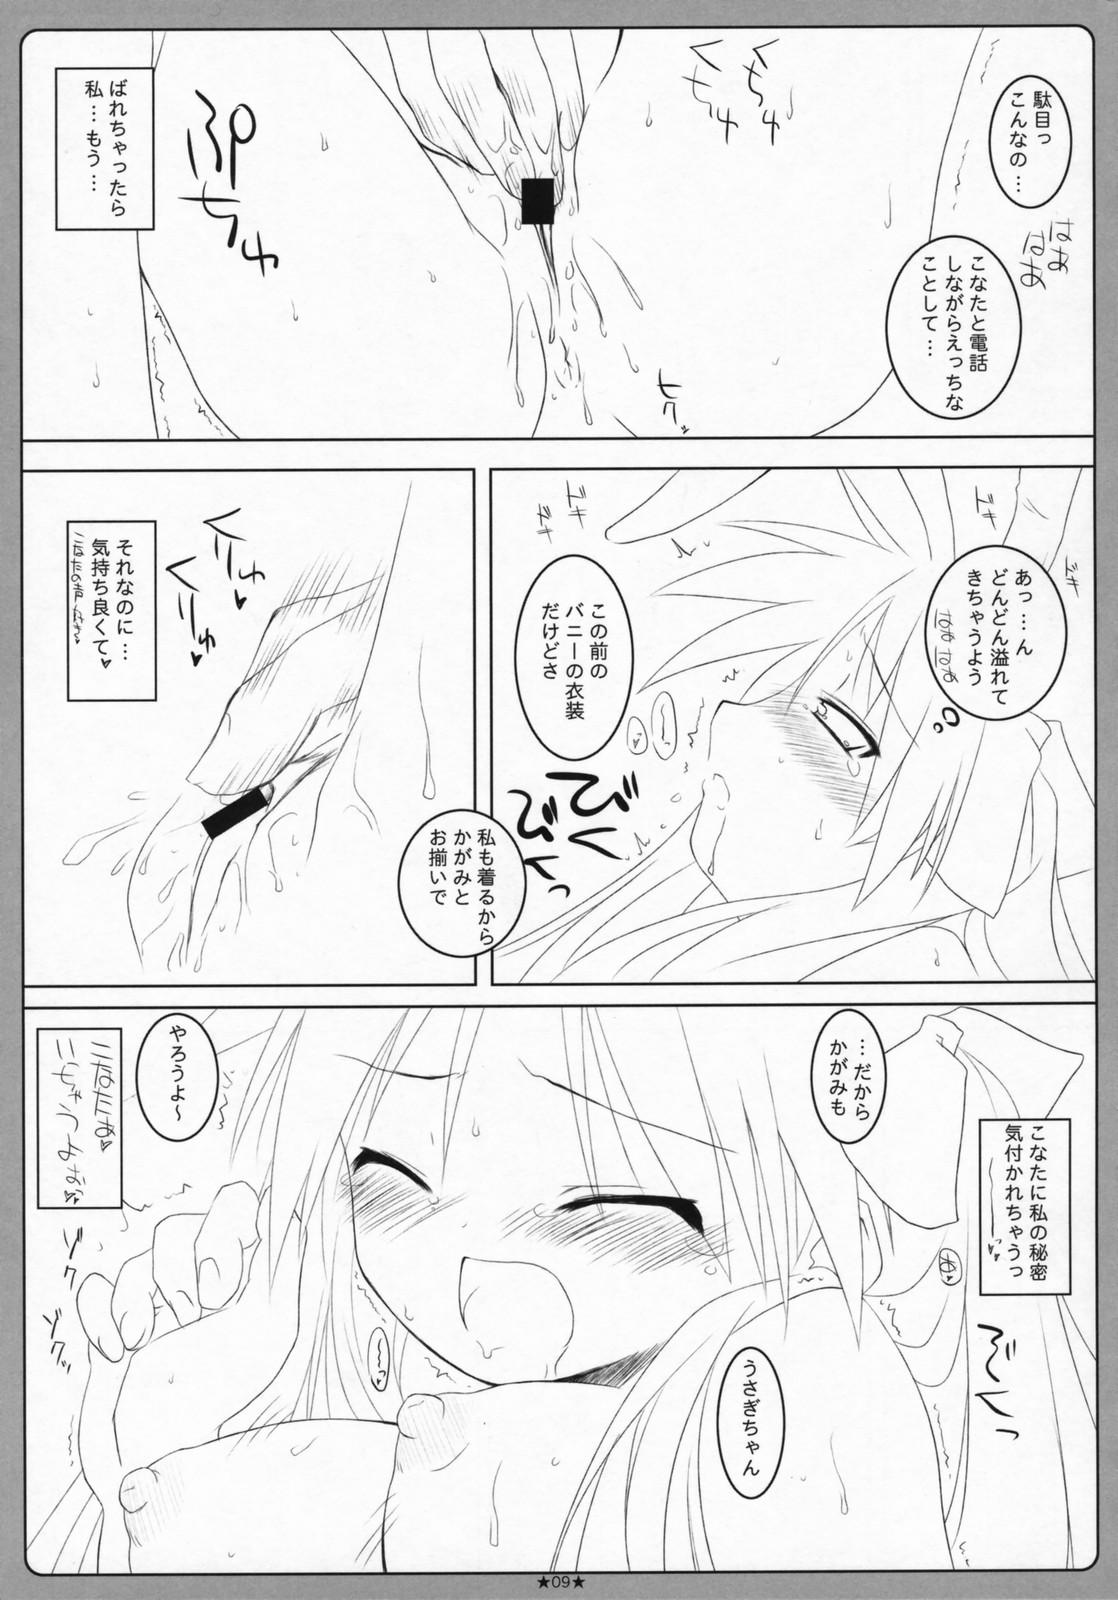 Messy Otona no Lucky Pan - Lucky star Fishnet - Page 8